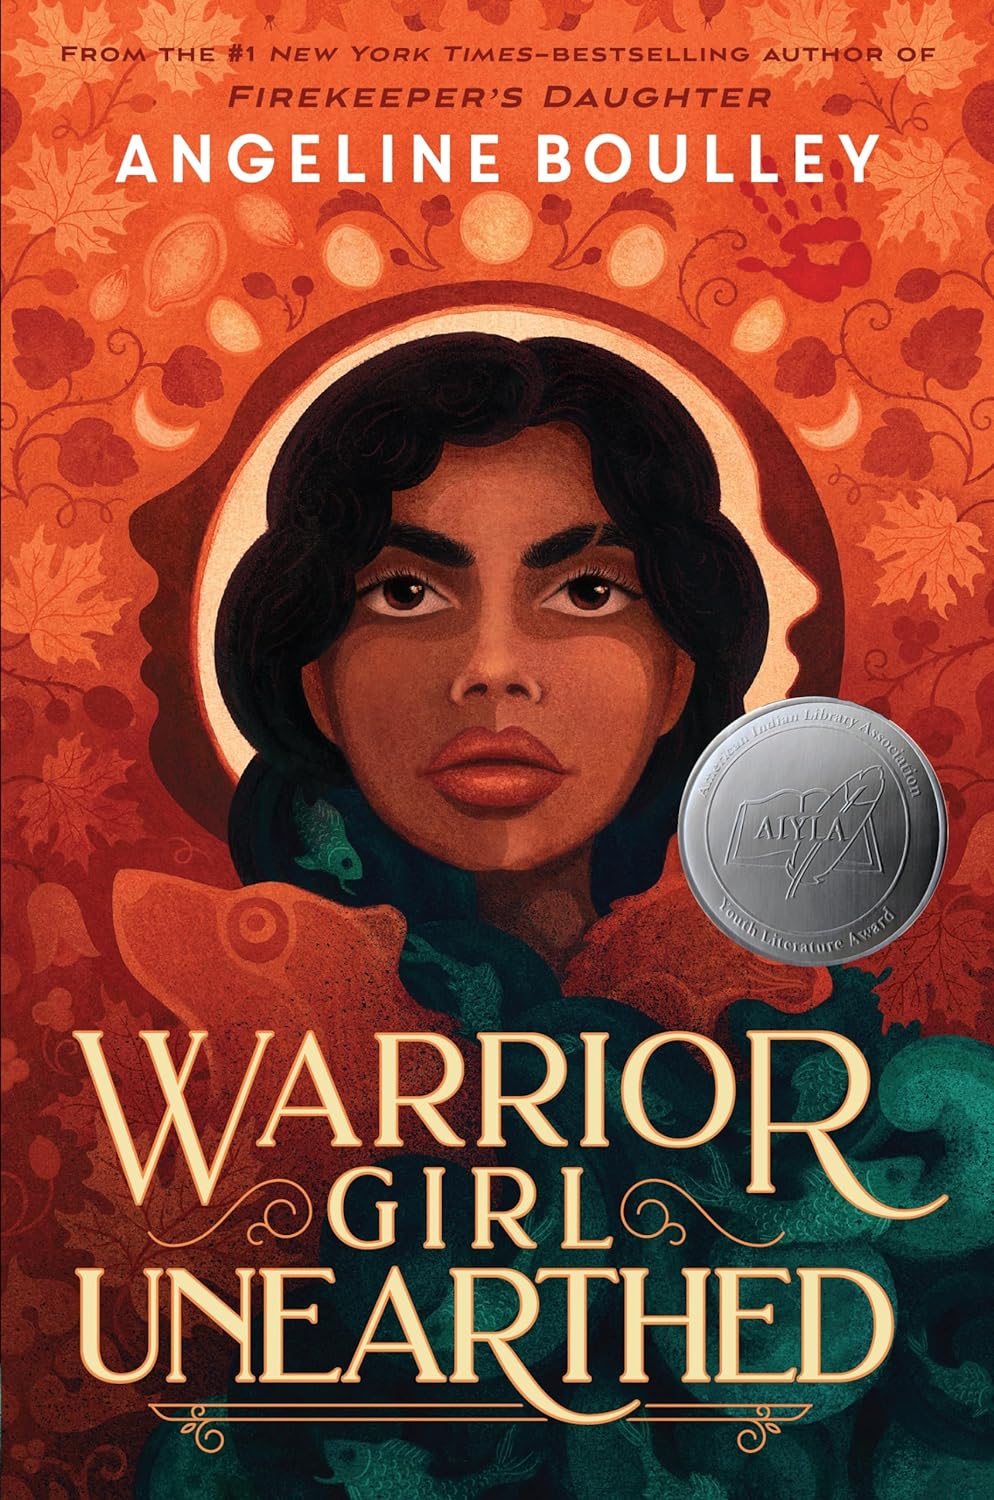 Warrior Girl Unearthed - Angeline Boulley